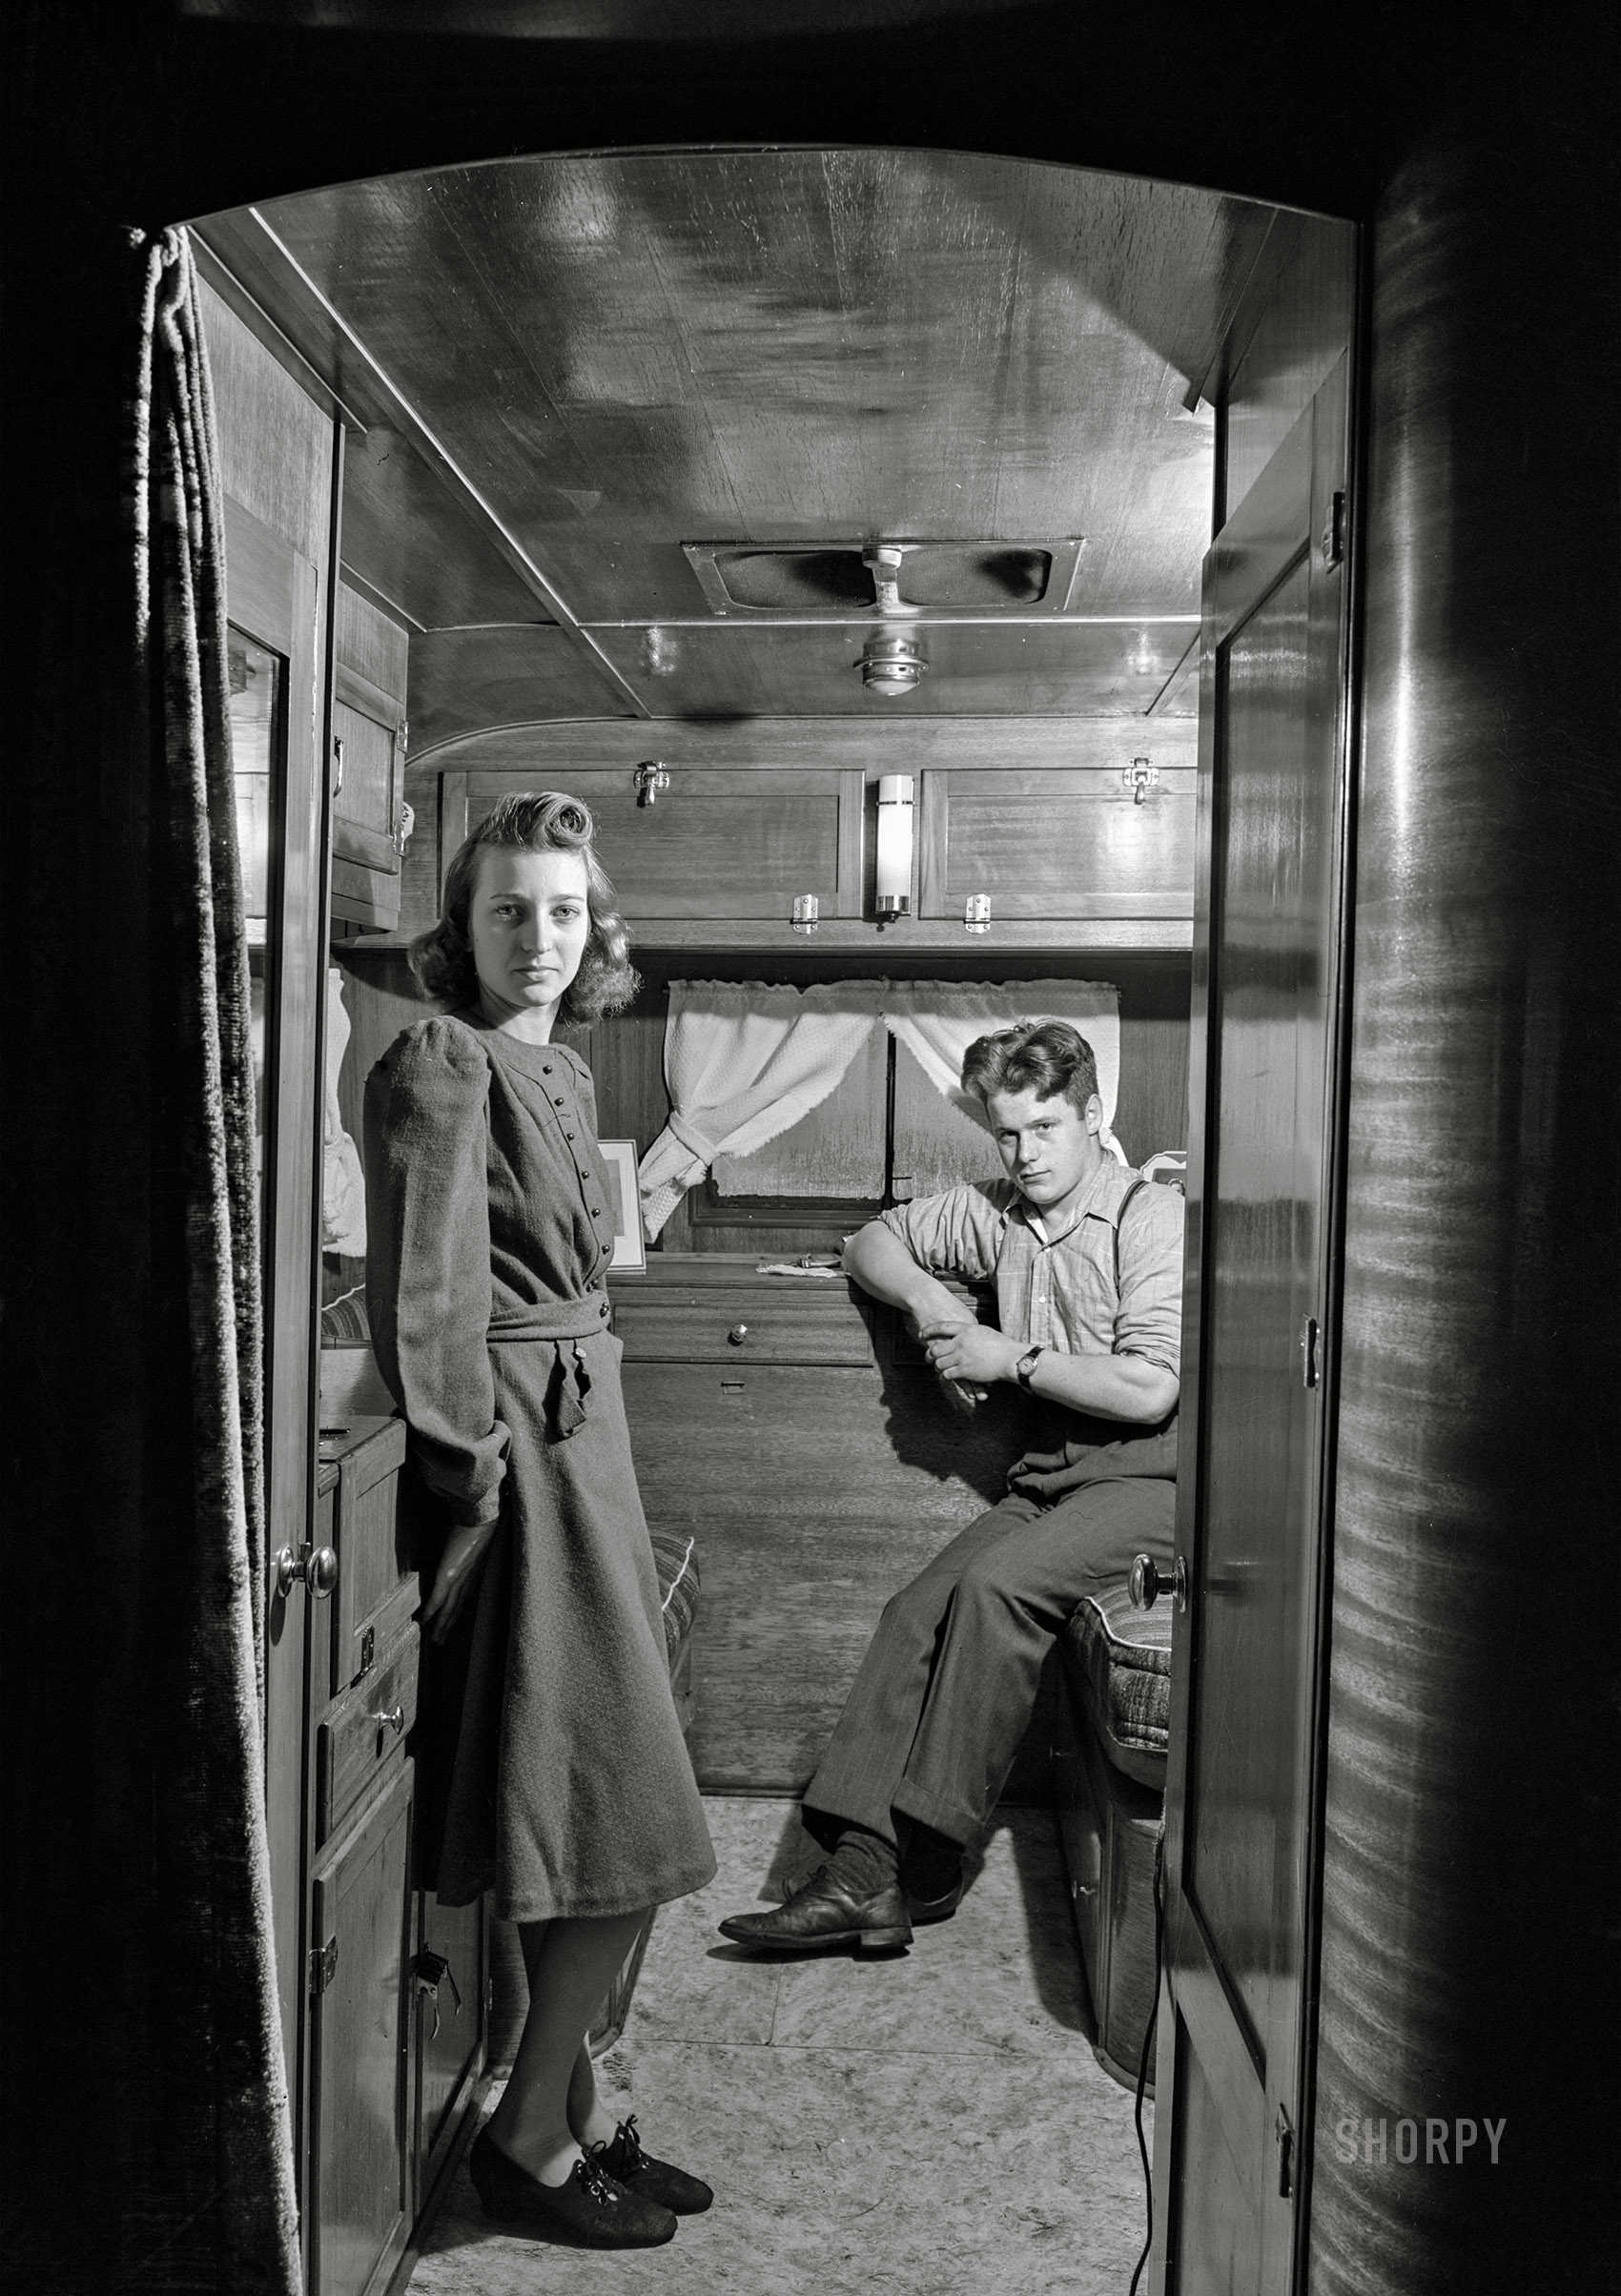 December 1940. "War boom in a New England industrial town. Mr. and Mrs. Leslie Bryant in their trailer about two miles out of Bath, Maine. Mr. Bryant works in the shipyard. They have been living in the trailer for two months. They could not rent in Bath and although a trailer cost them almost as much as a house, Mr. Bryant feels that it is a better investment because they do not know where they will go next in search of work when this 'boom' is over." Medium format acetate negative by Jack Delano for the Farm Security Administration. View full size.